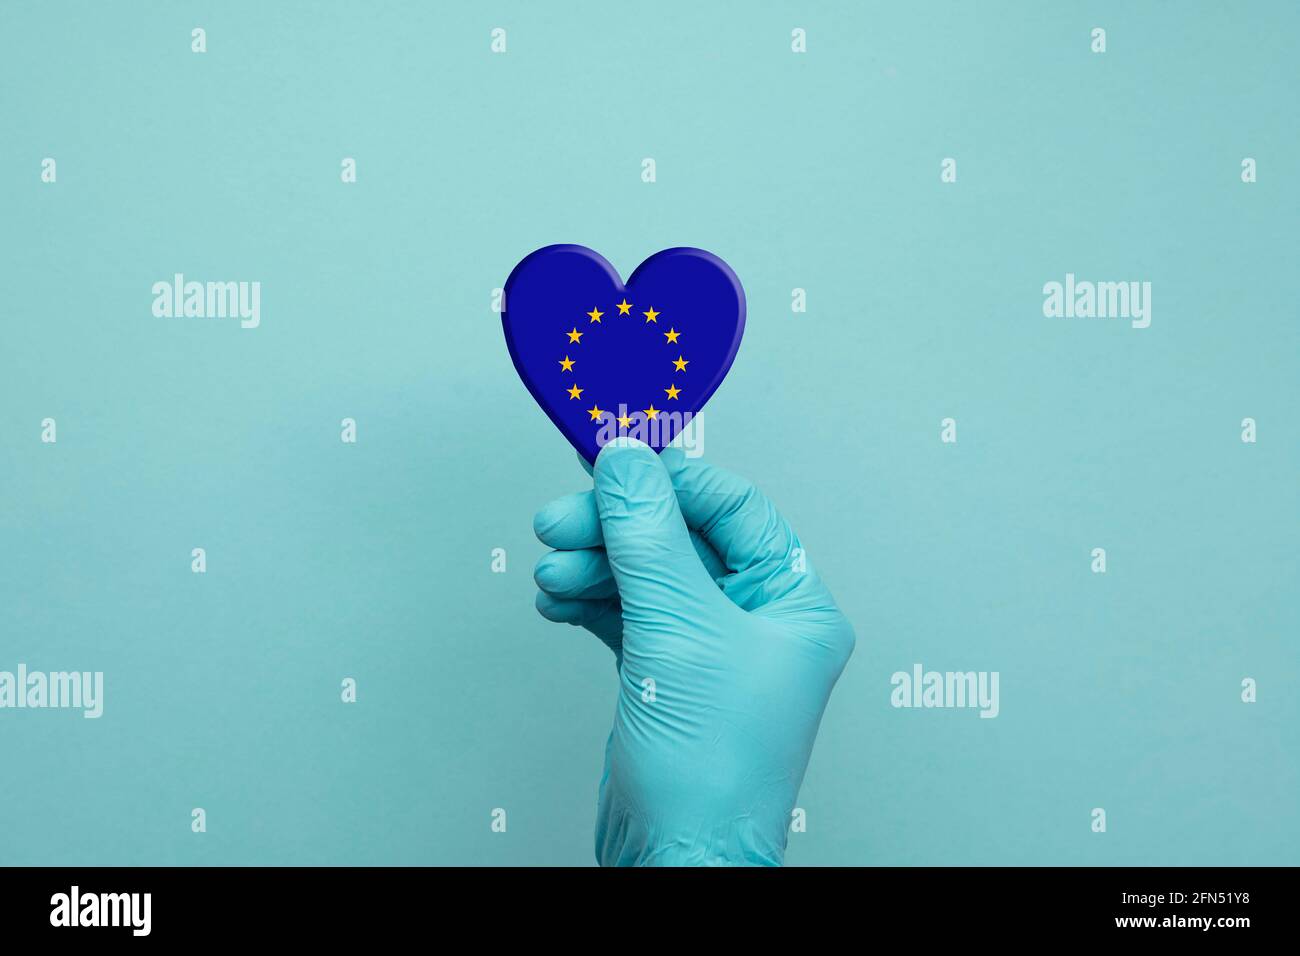 Hands wearing protective surgical gloves holding European Union flag heart Stock Photo